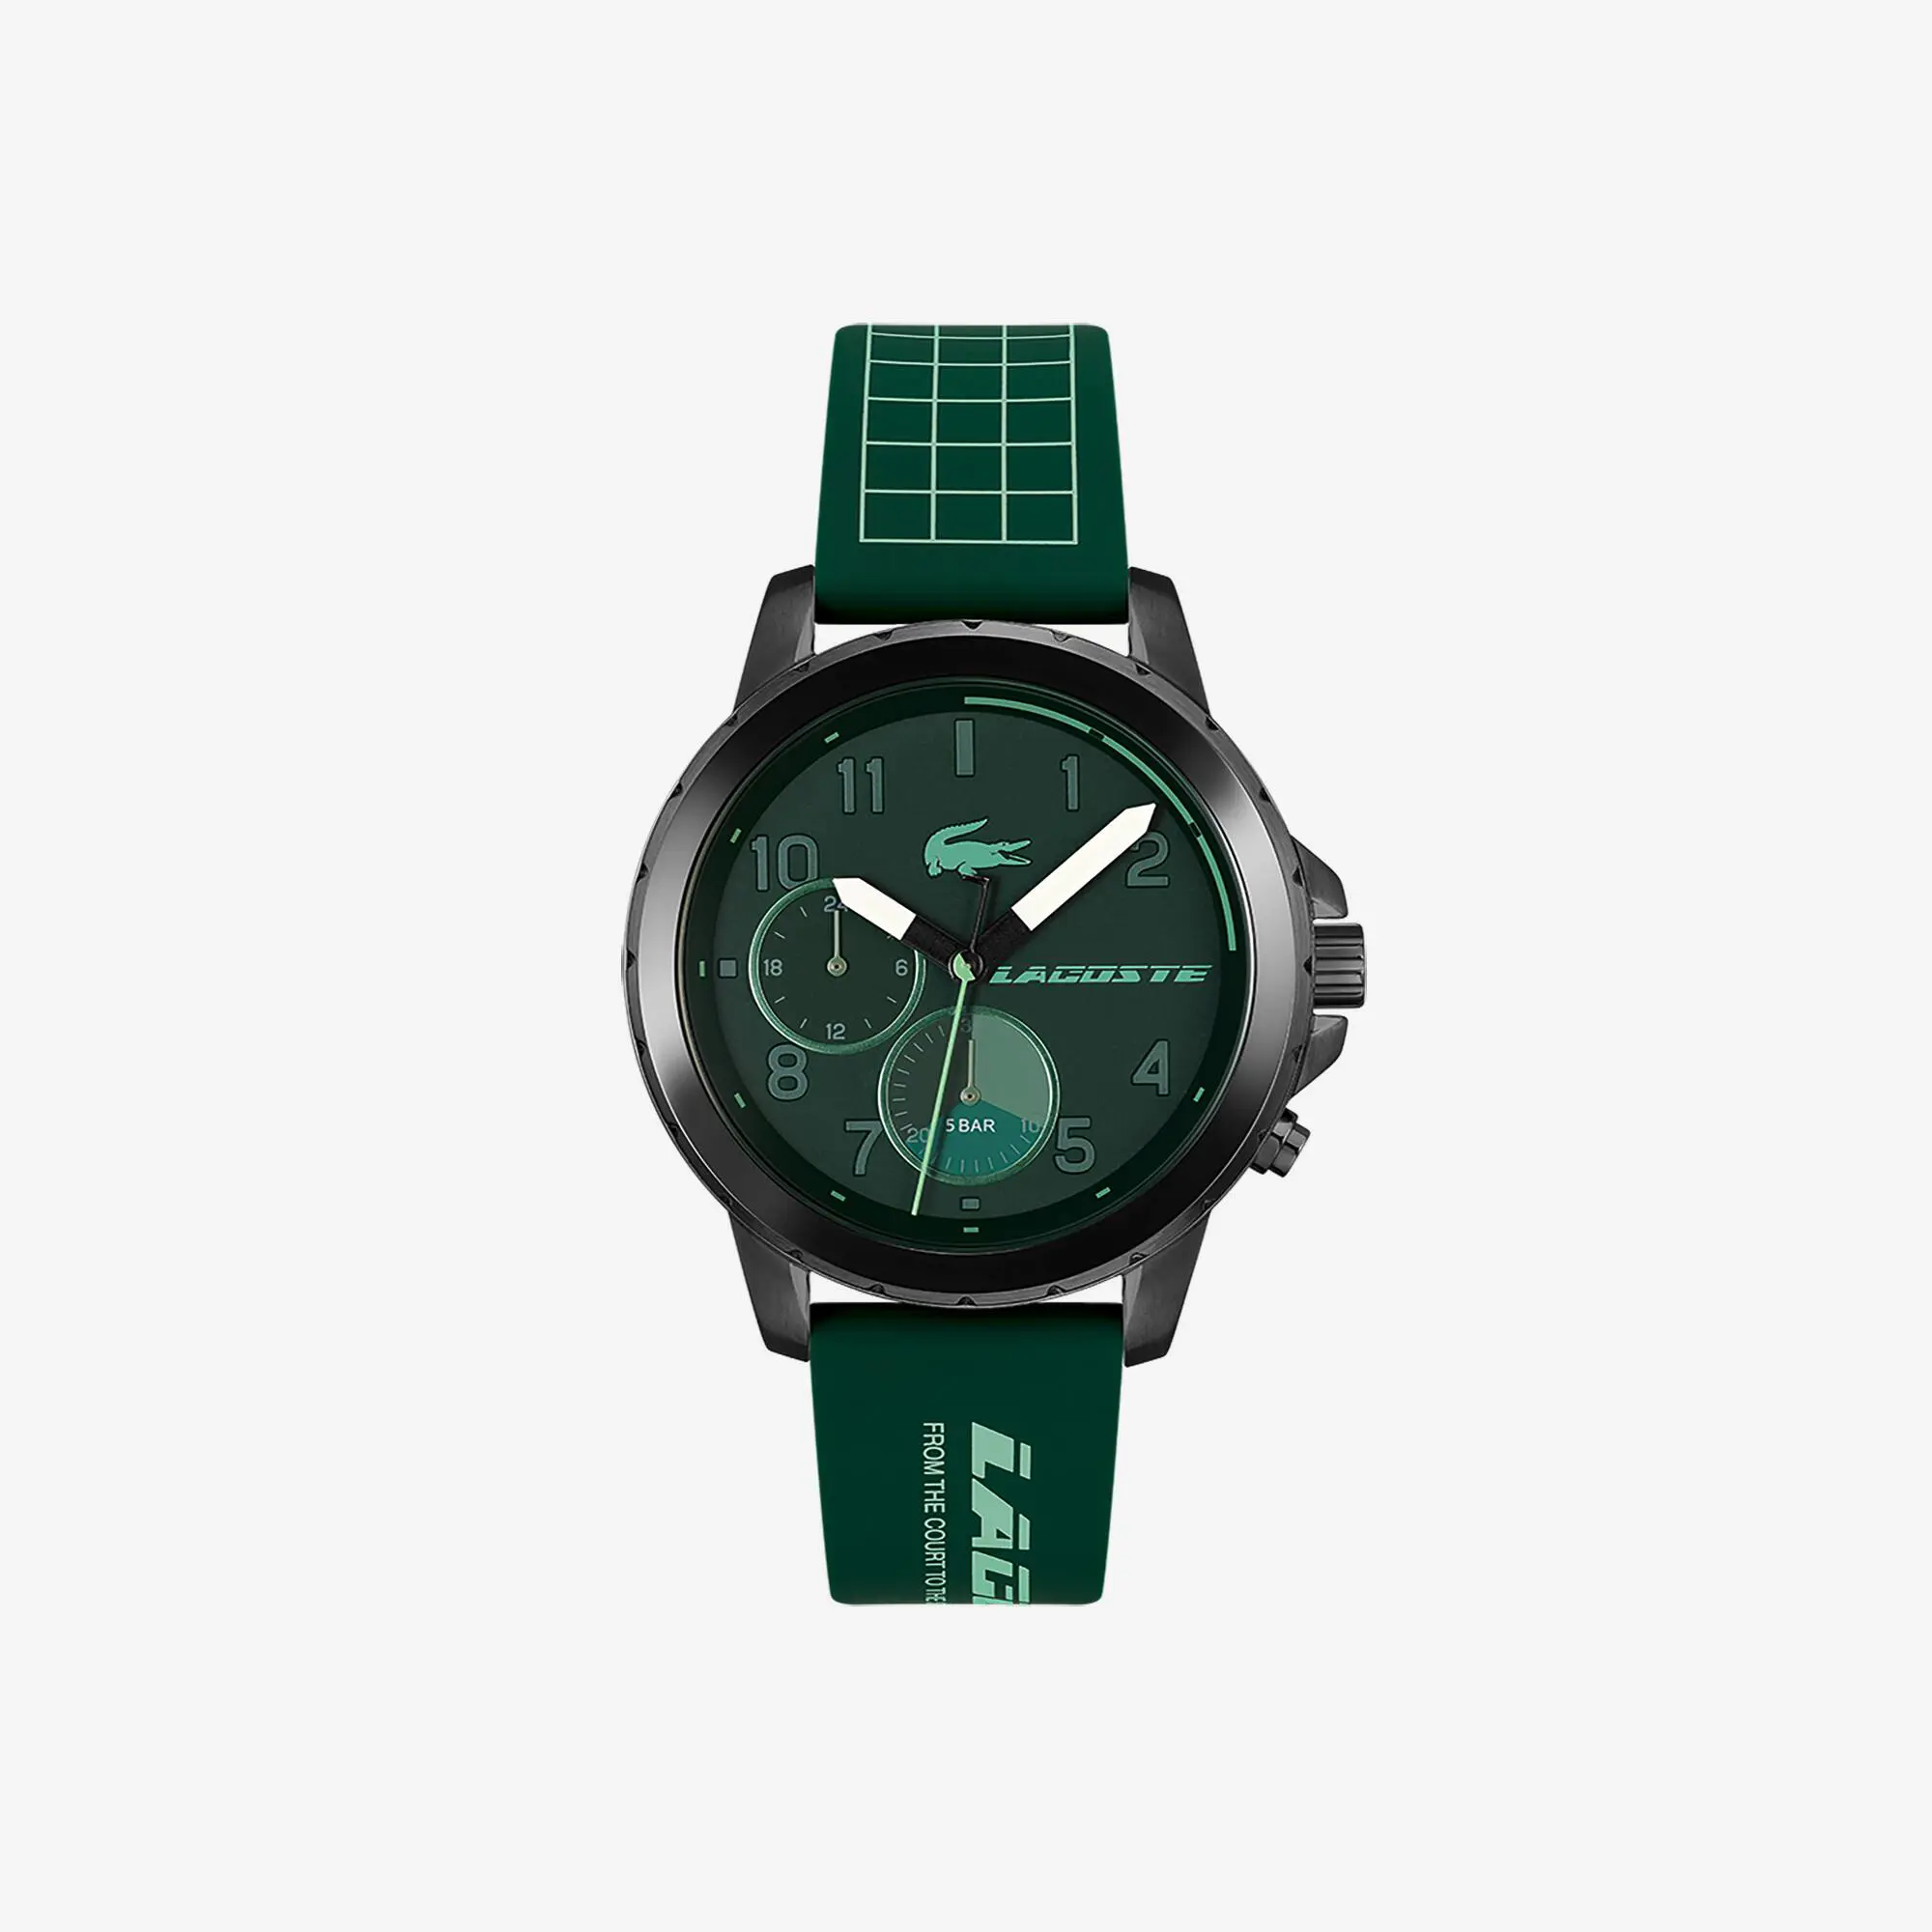 Lacoste Men’s Endurance Multifunctional Green Silicone Watch. 1